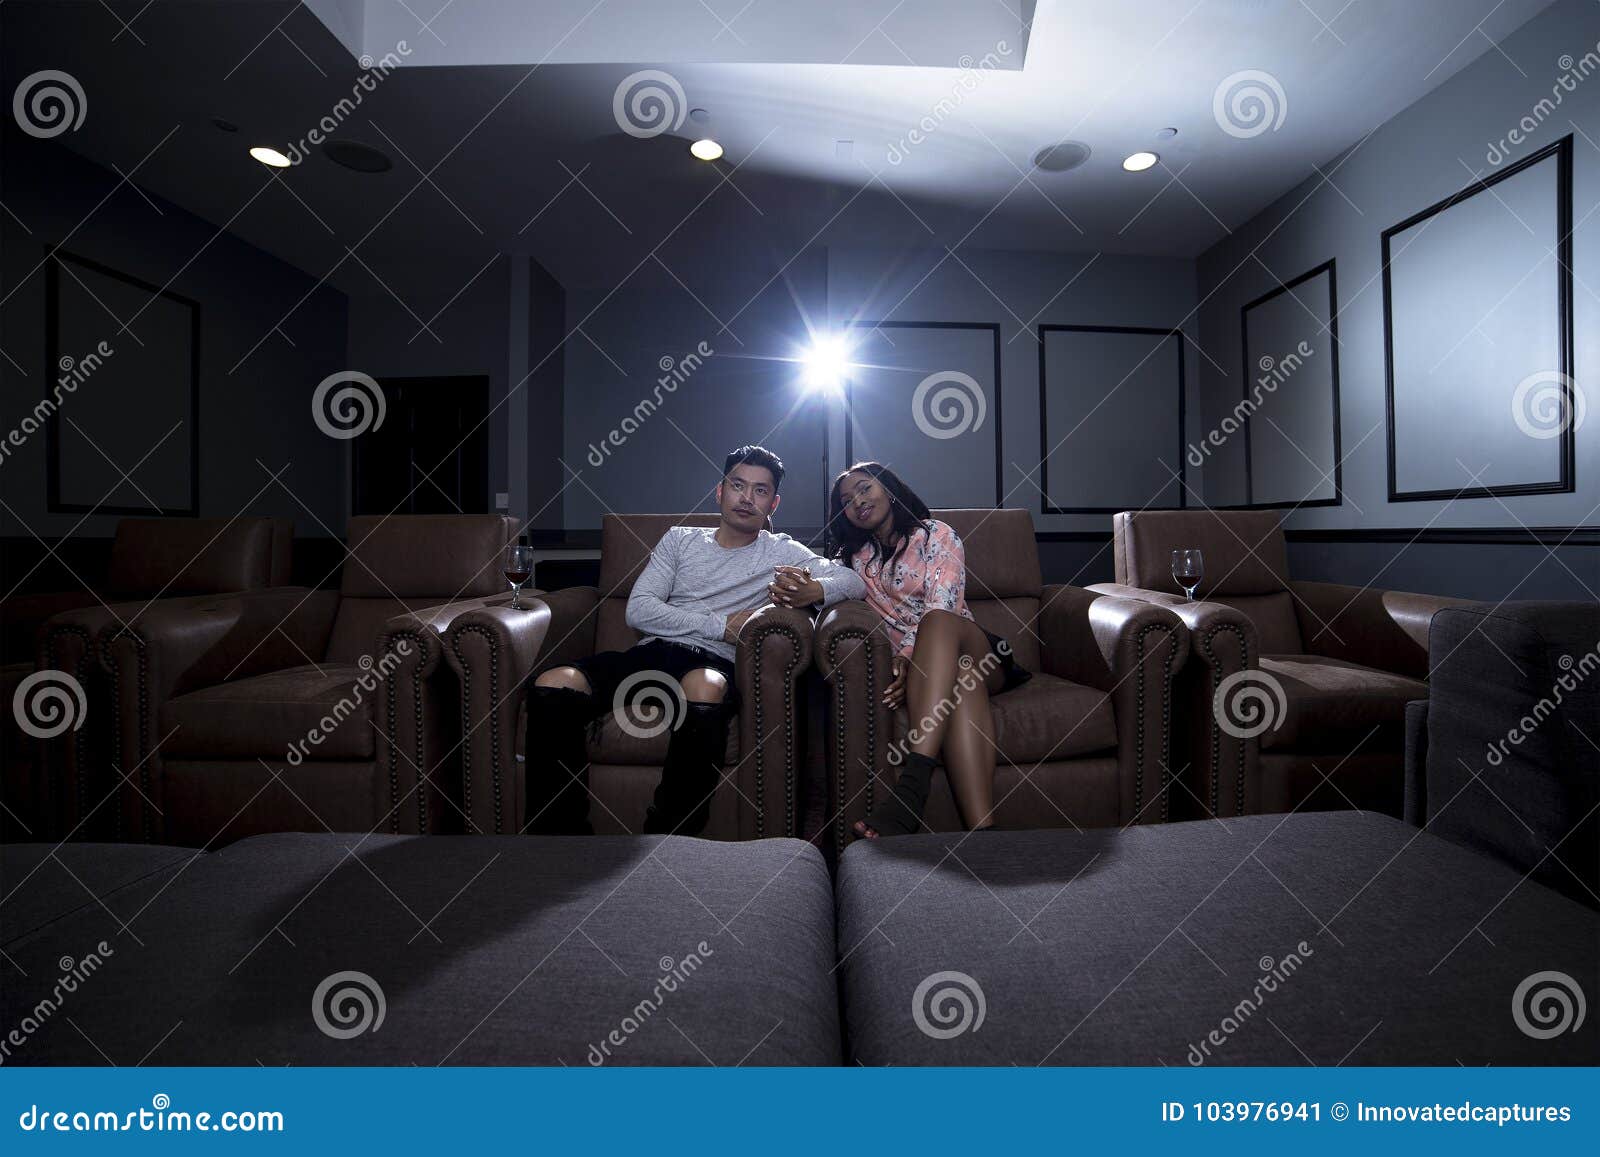 Interracial Couple On A Home Theater Date Stock Image Image Of Chair Husband 103976941 